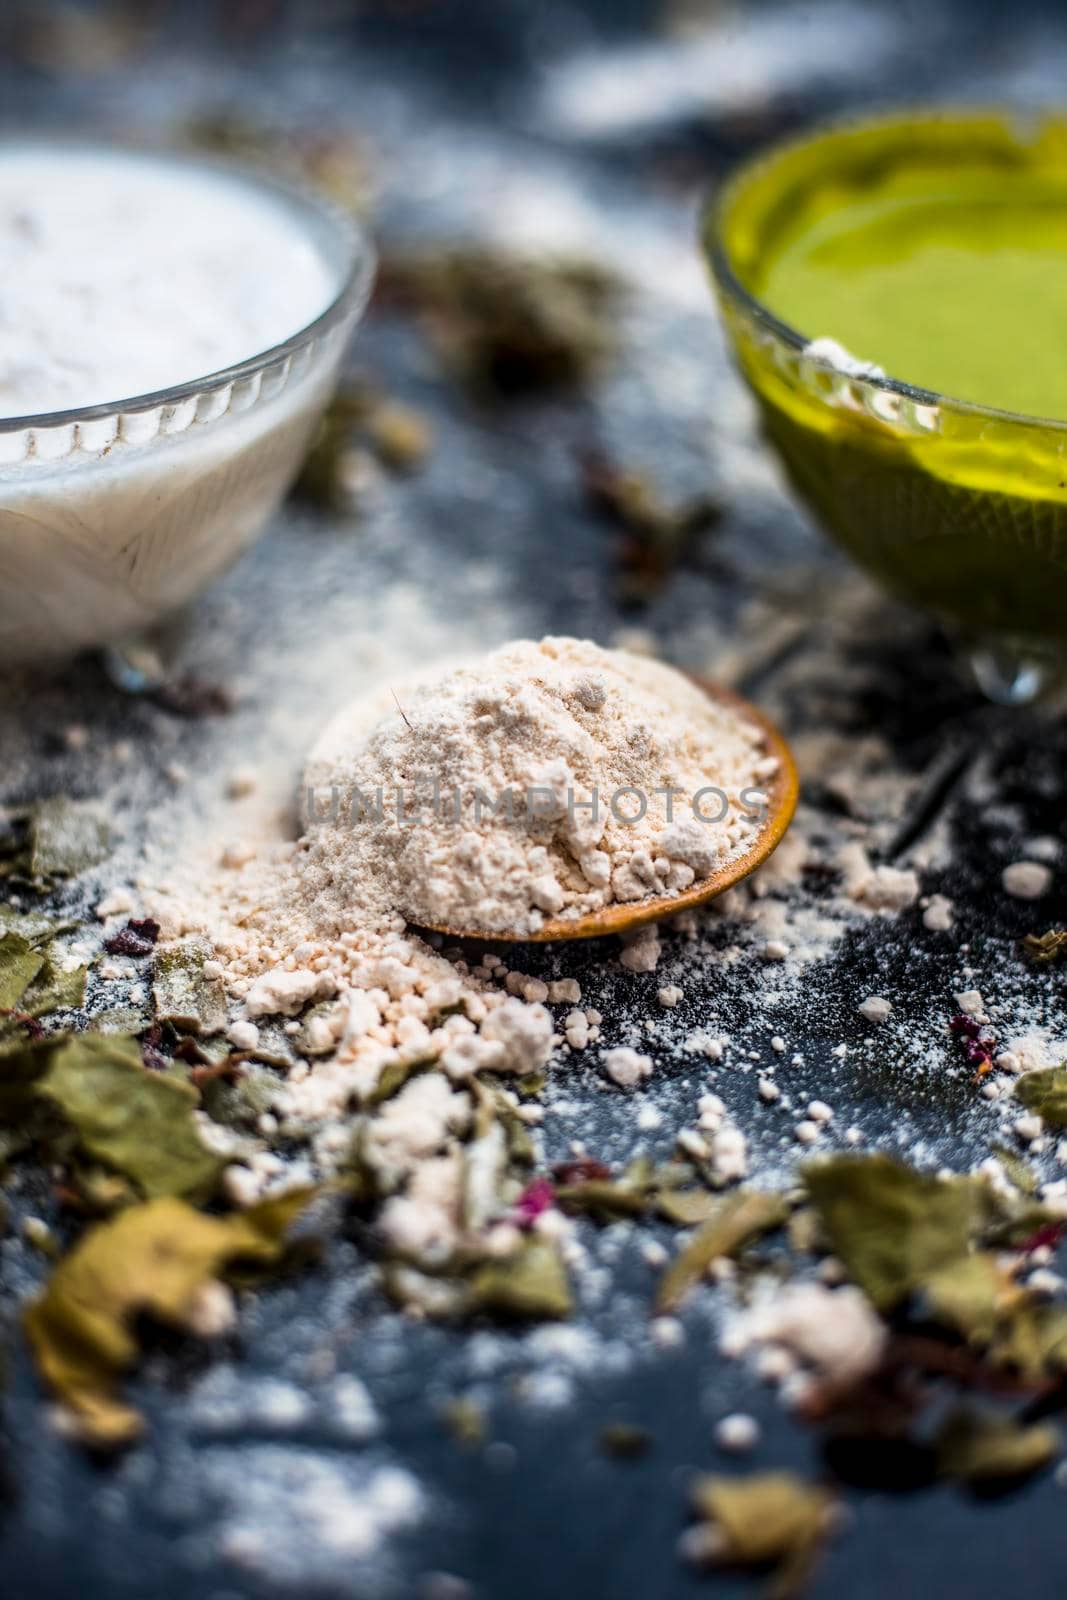 Neem or Indian Lilac face mask on the black wooden surface for acne and scars consisting of gram flour, neem paste, and some curd. by mirzamlk